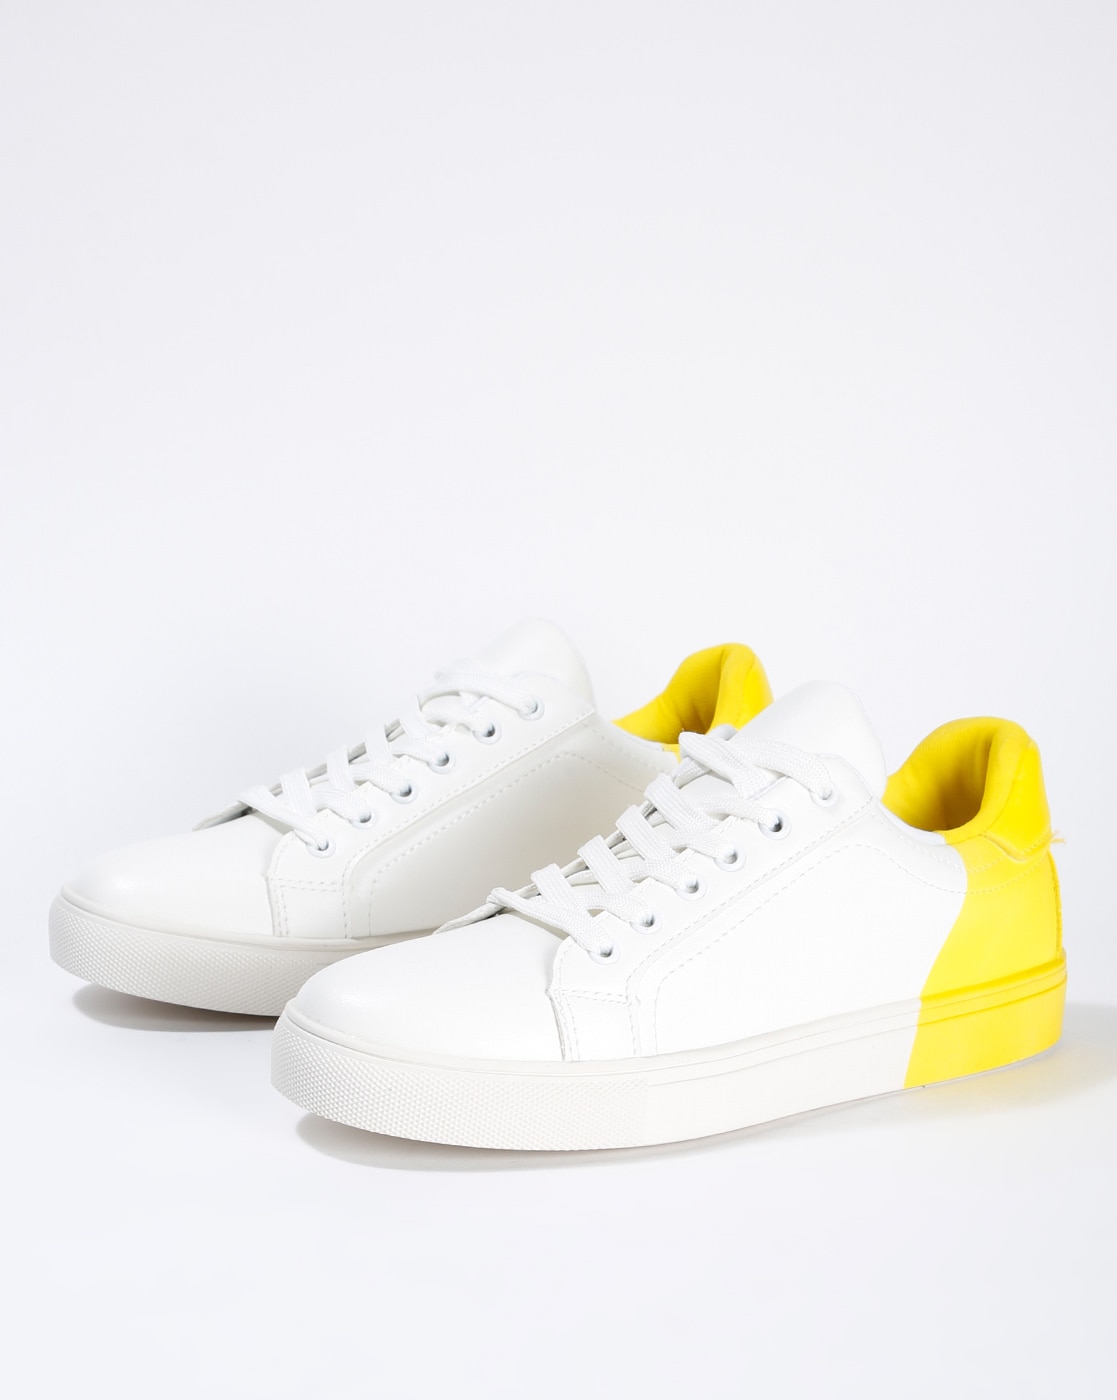 Buy White \u0026 Yellow Casual Shoes for 